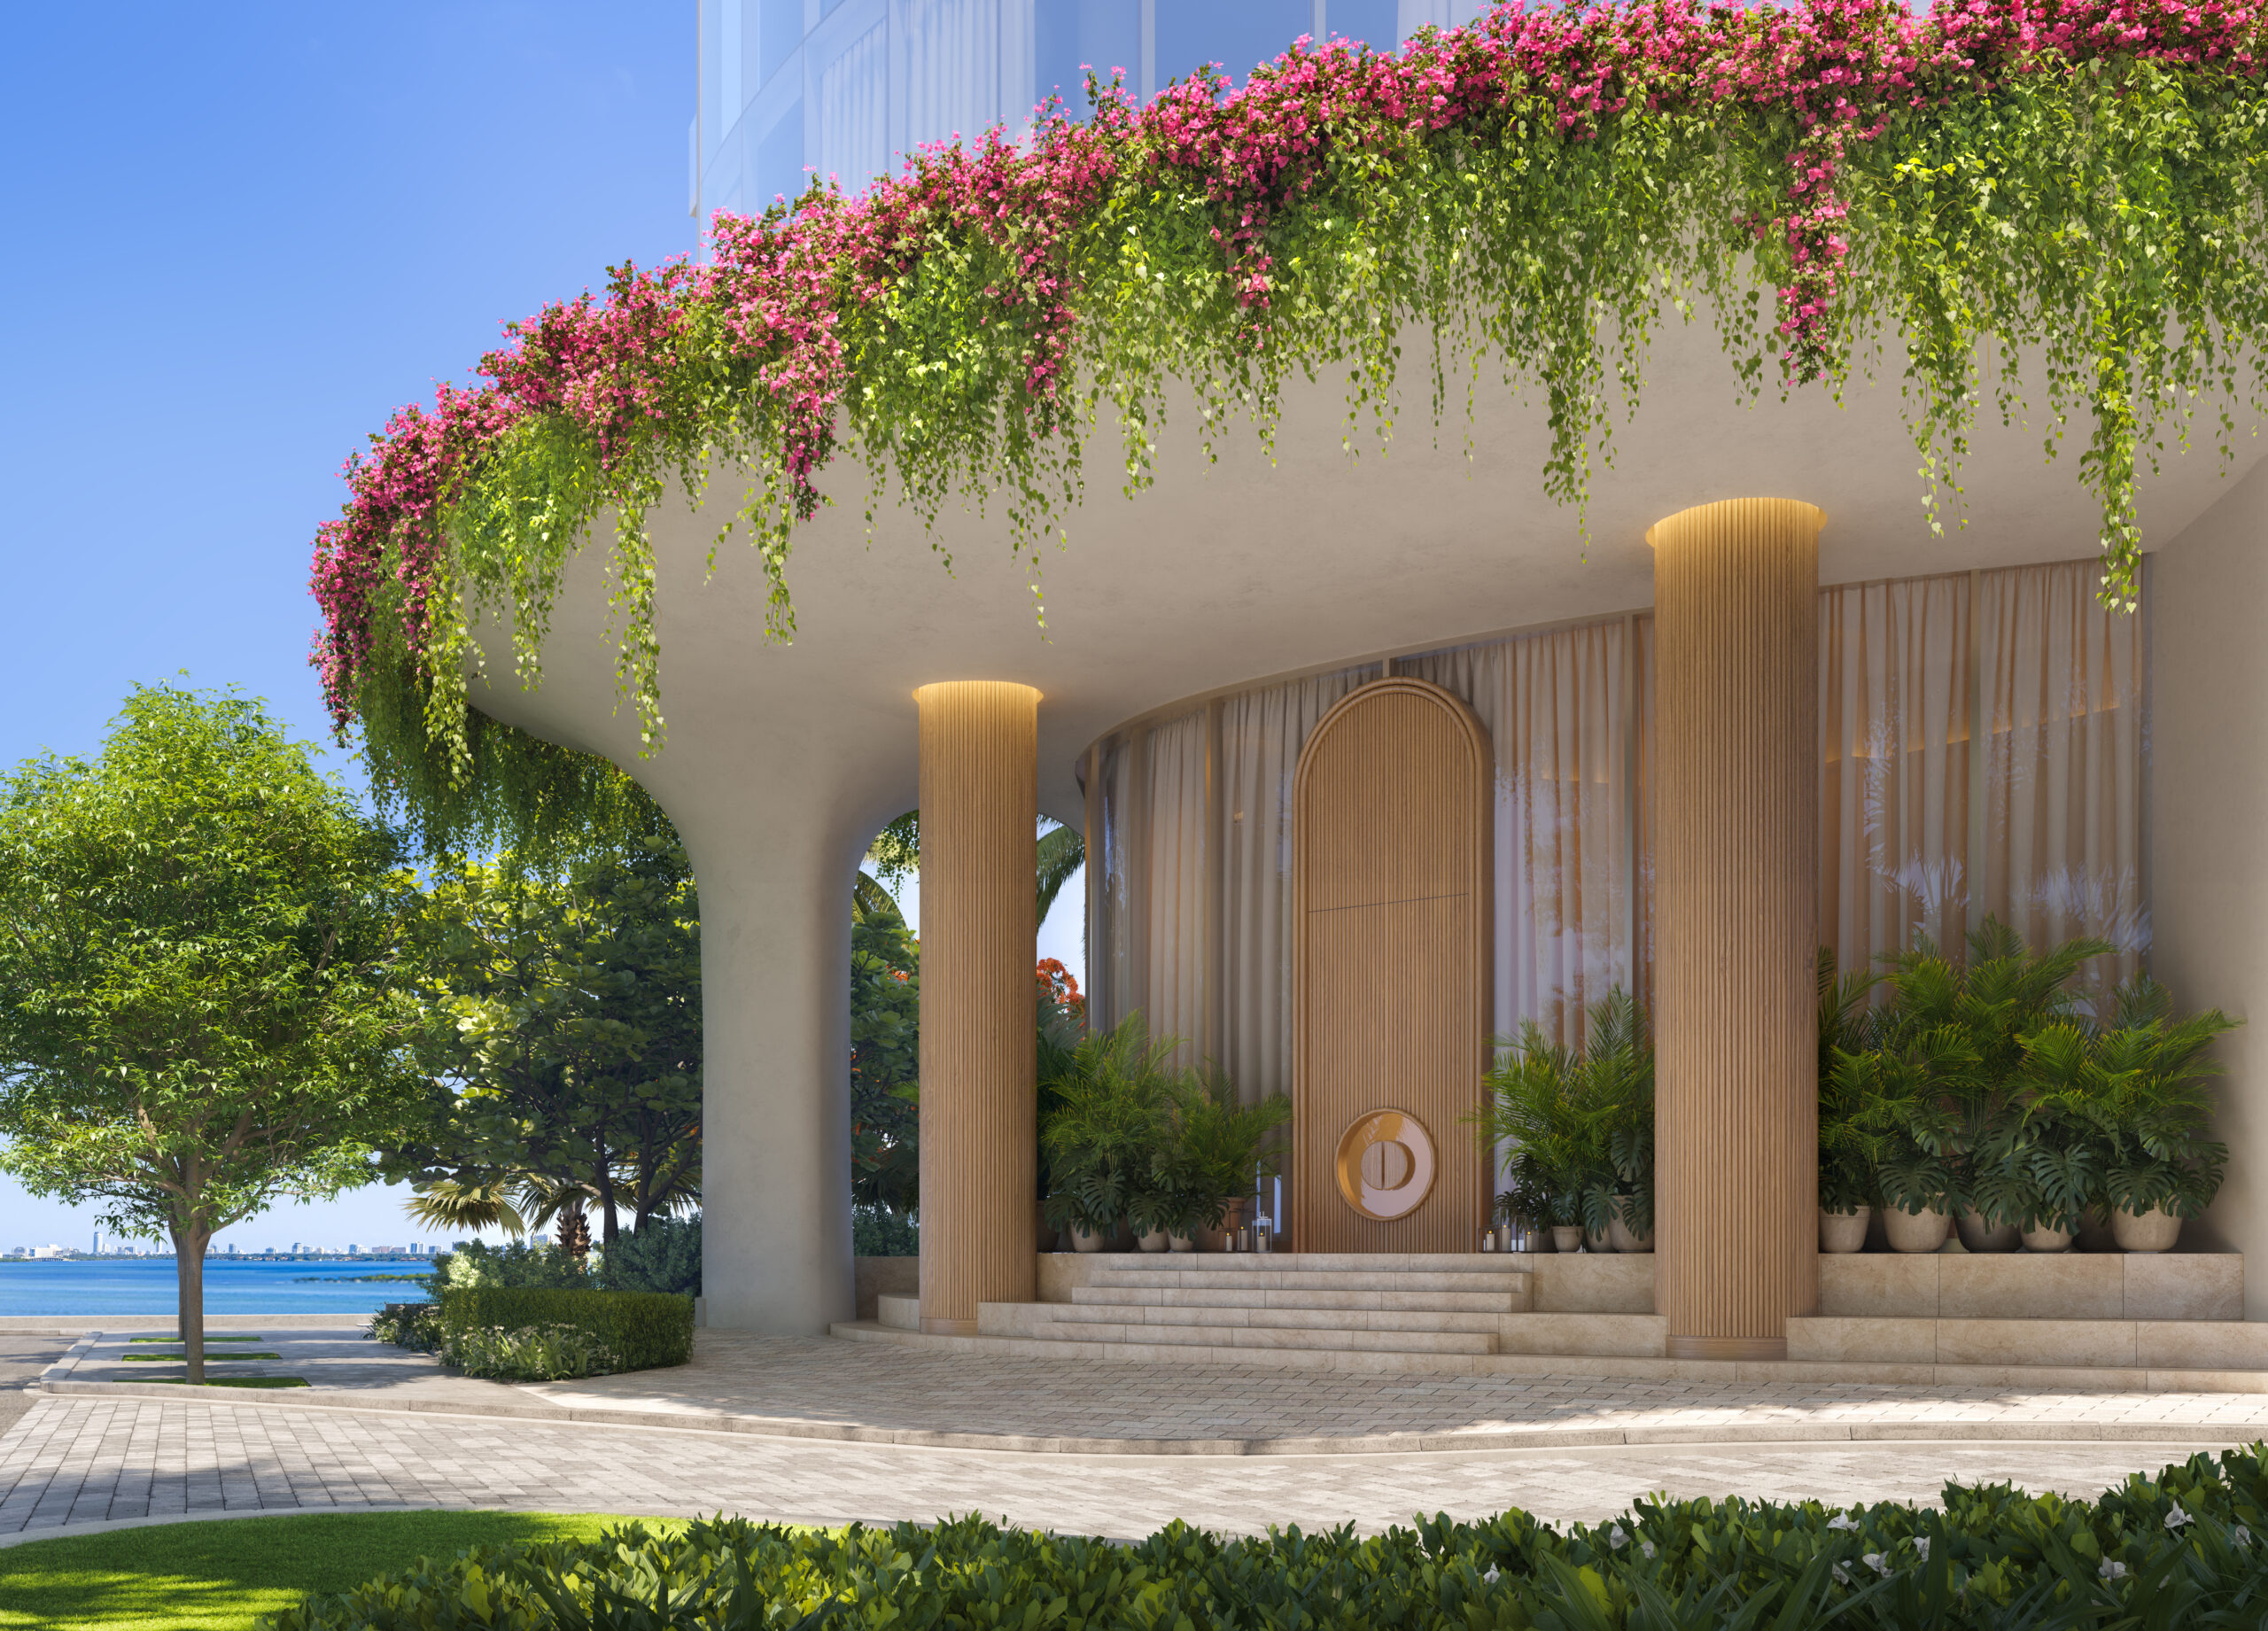 The building entrance adorned with plants, trees, and lights, creating a welcoming and visually appealing atmosphere.